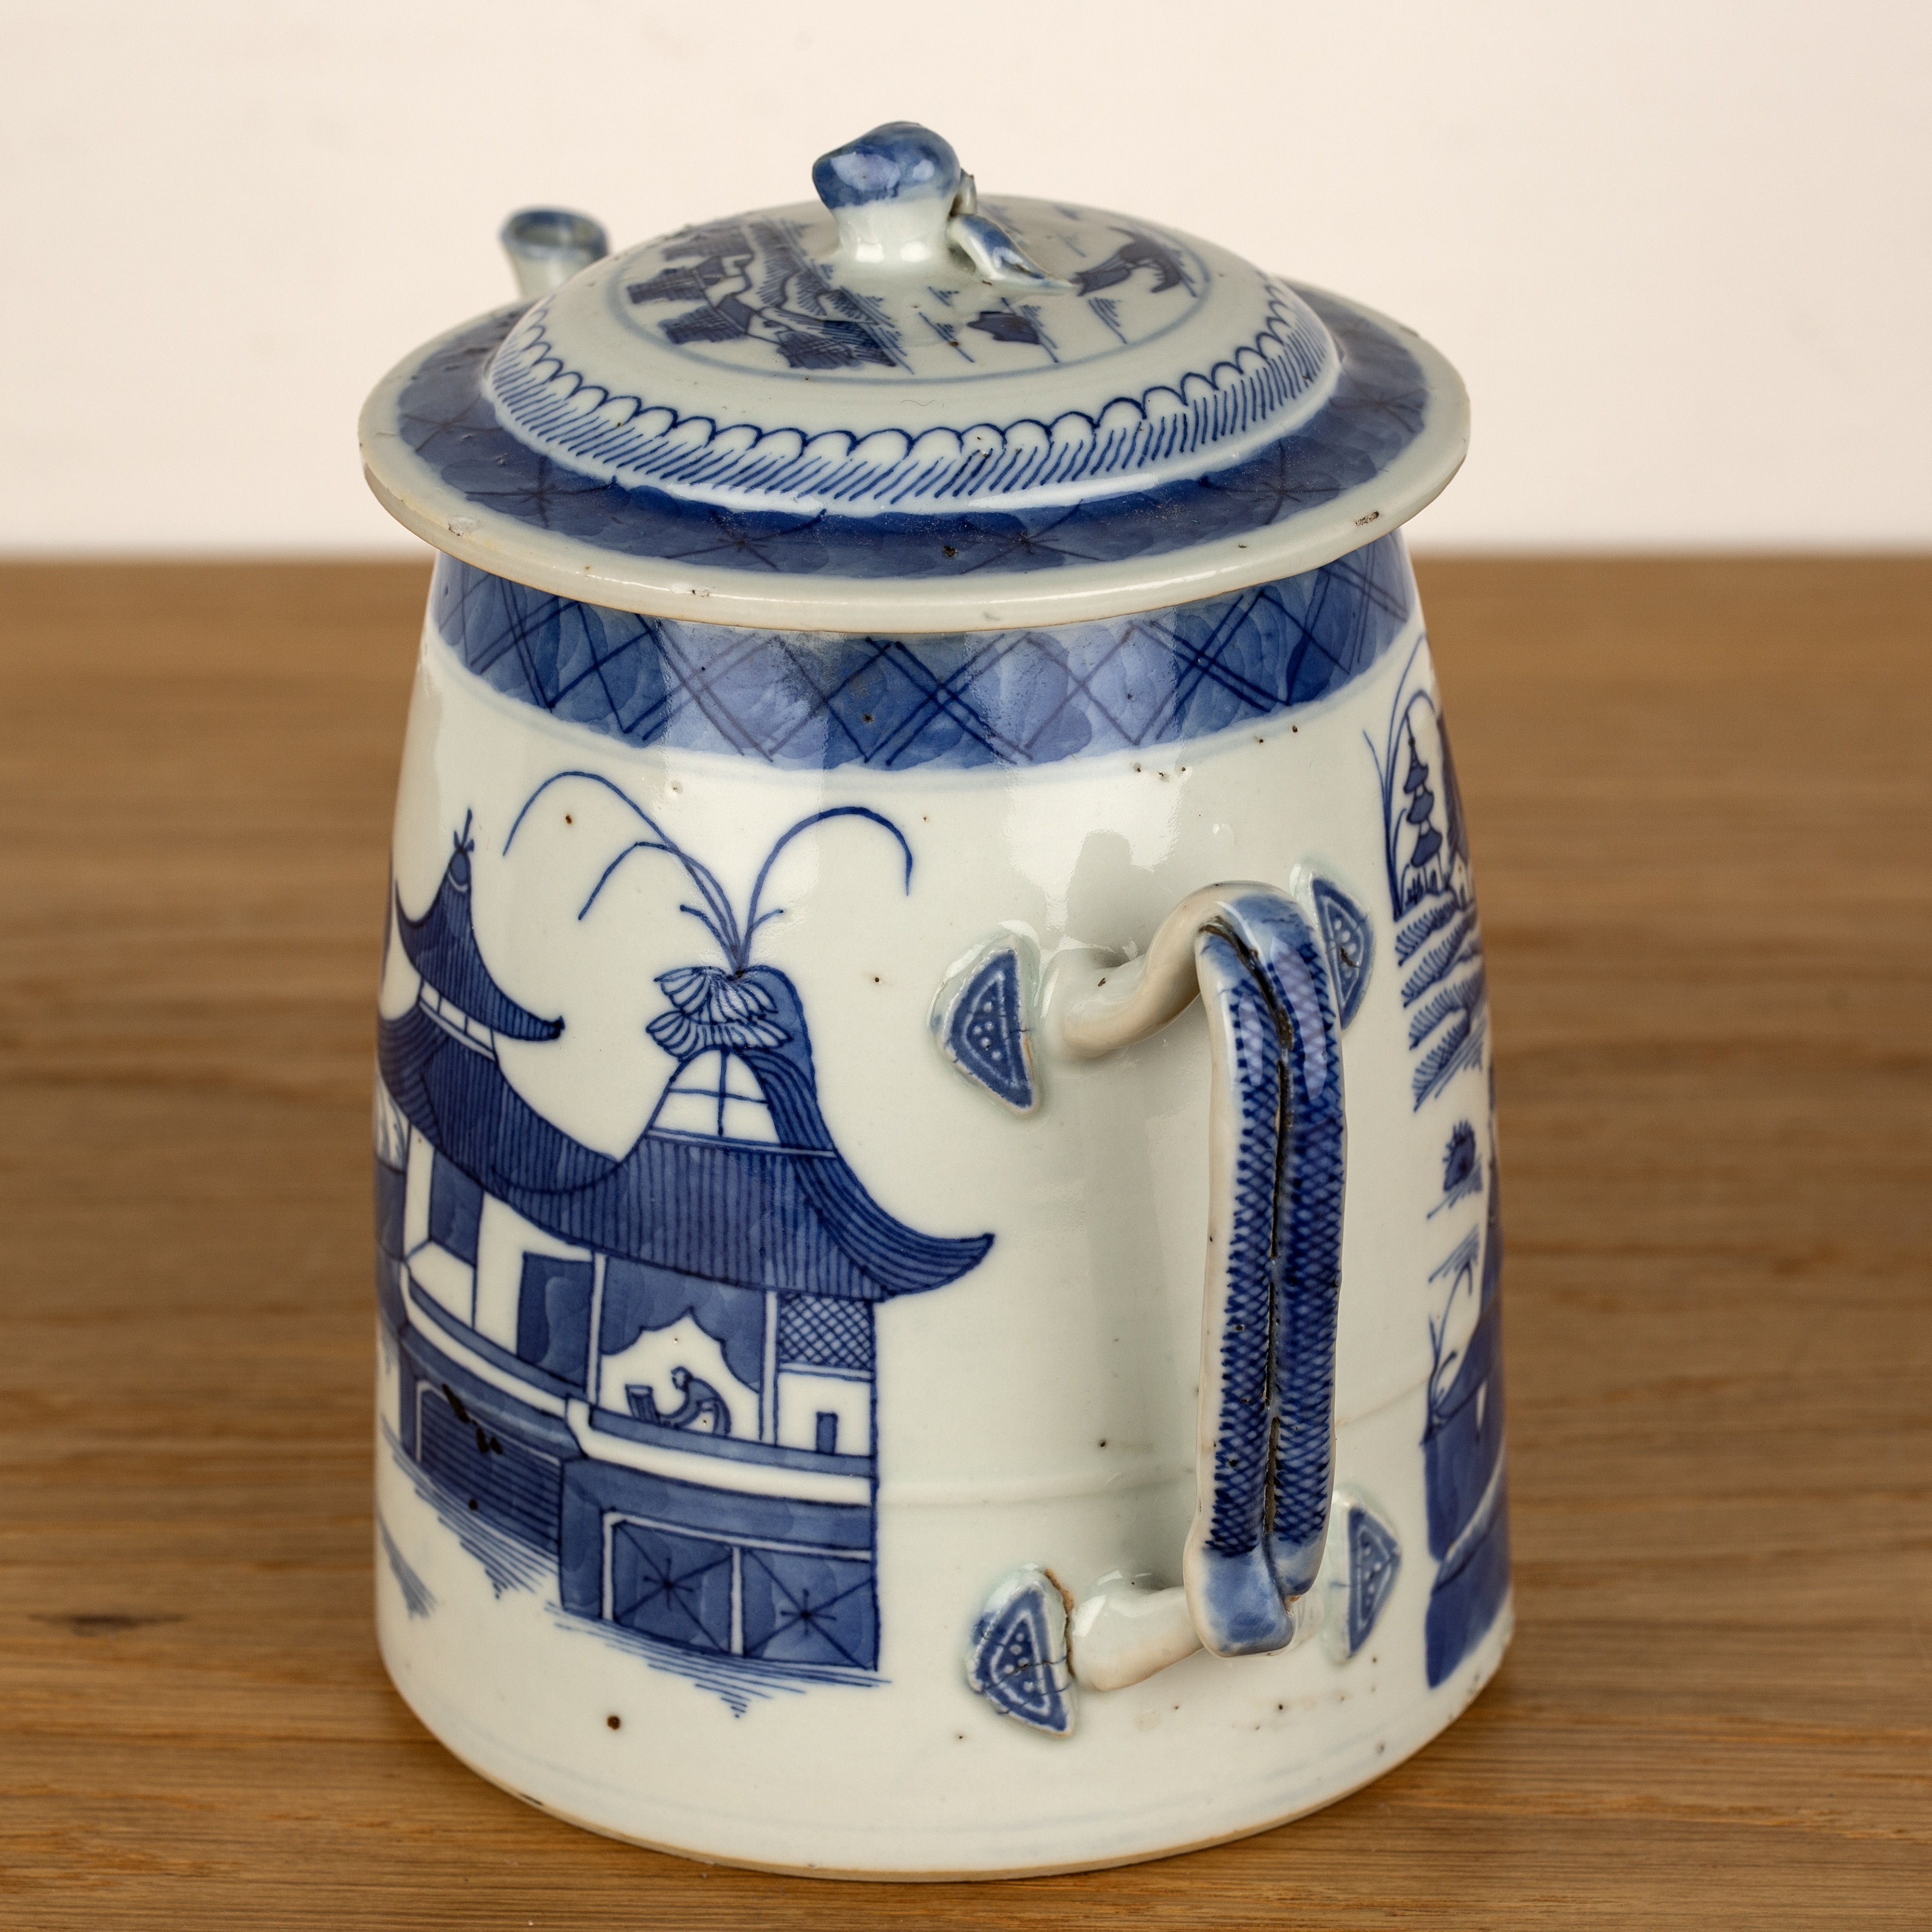 Blue and white export porcelain teapot Chinese, 19th Century painted with temples and a lake - Image 2 of 6